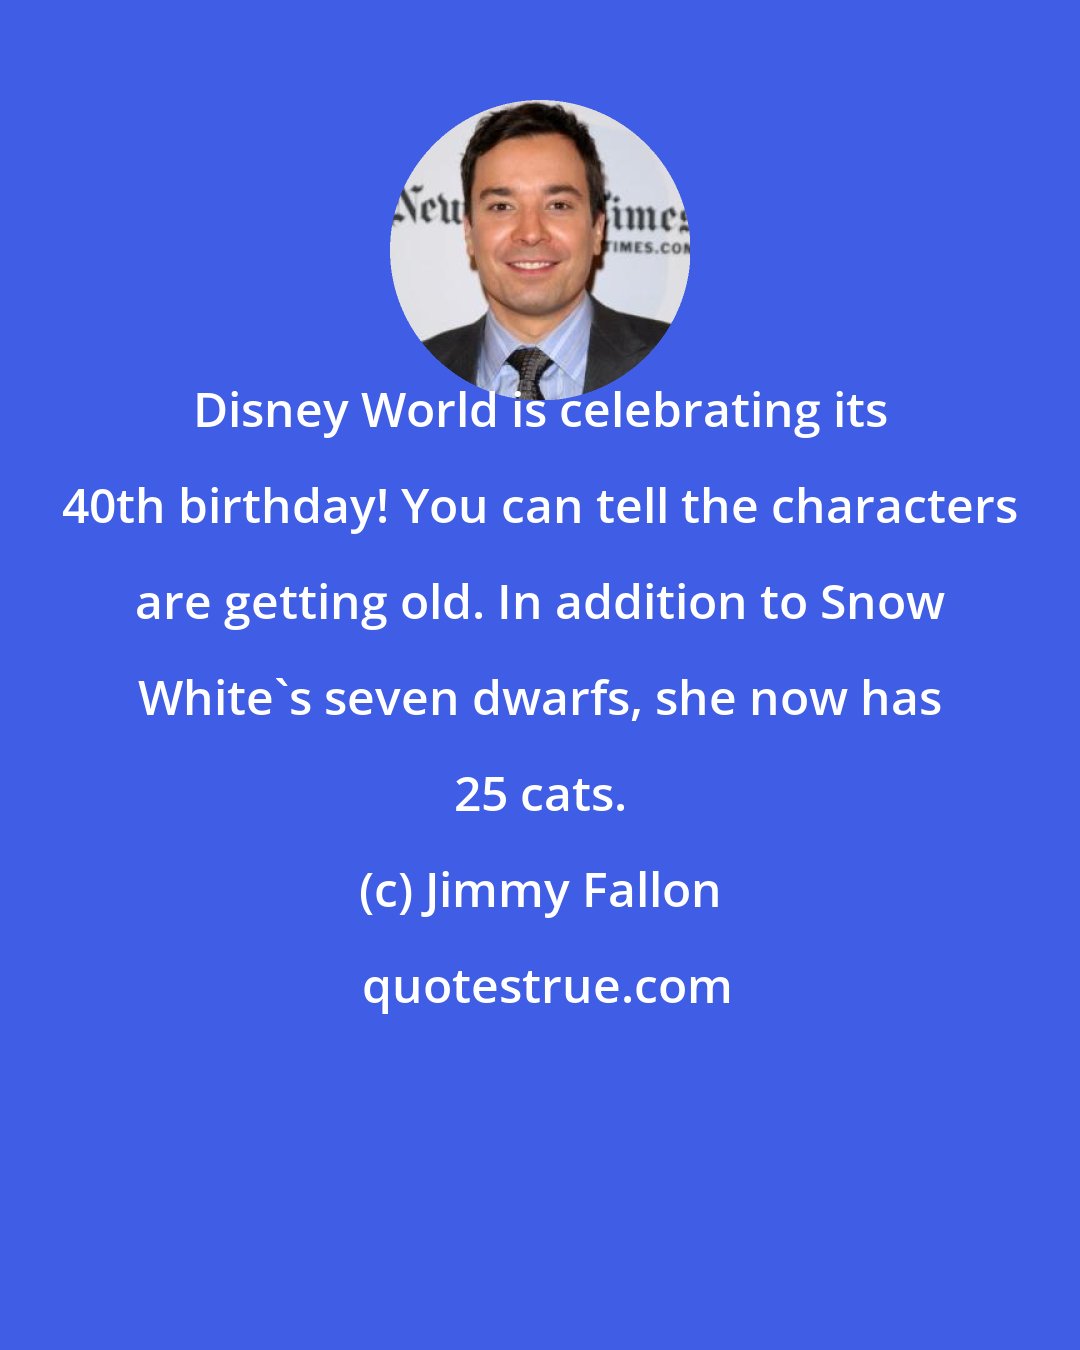 Jimmy Fallon: Disney World is celebrating its 40th birthday! You can tell the characters are getting old. In addition to Snow White's seven dwarfs, she now has 25 cats.